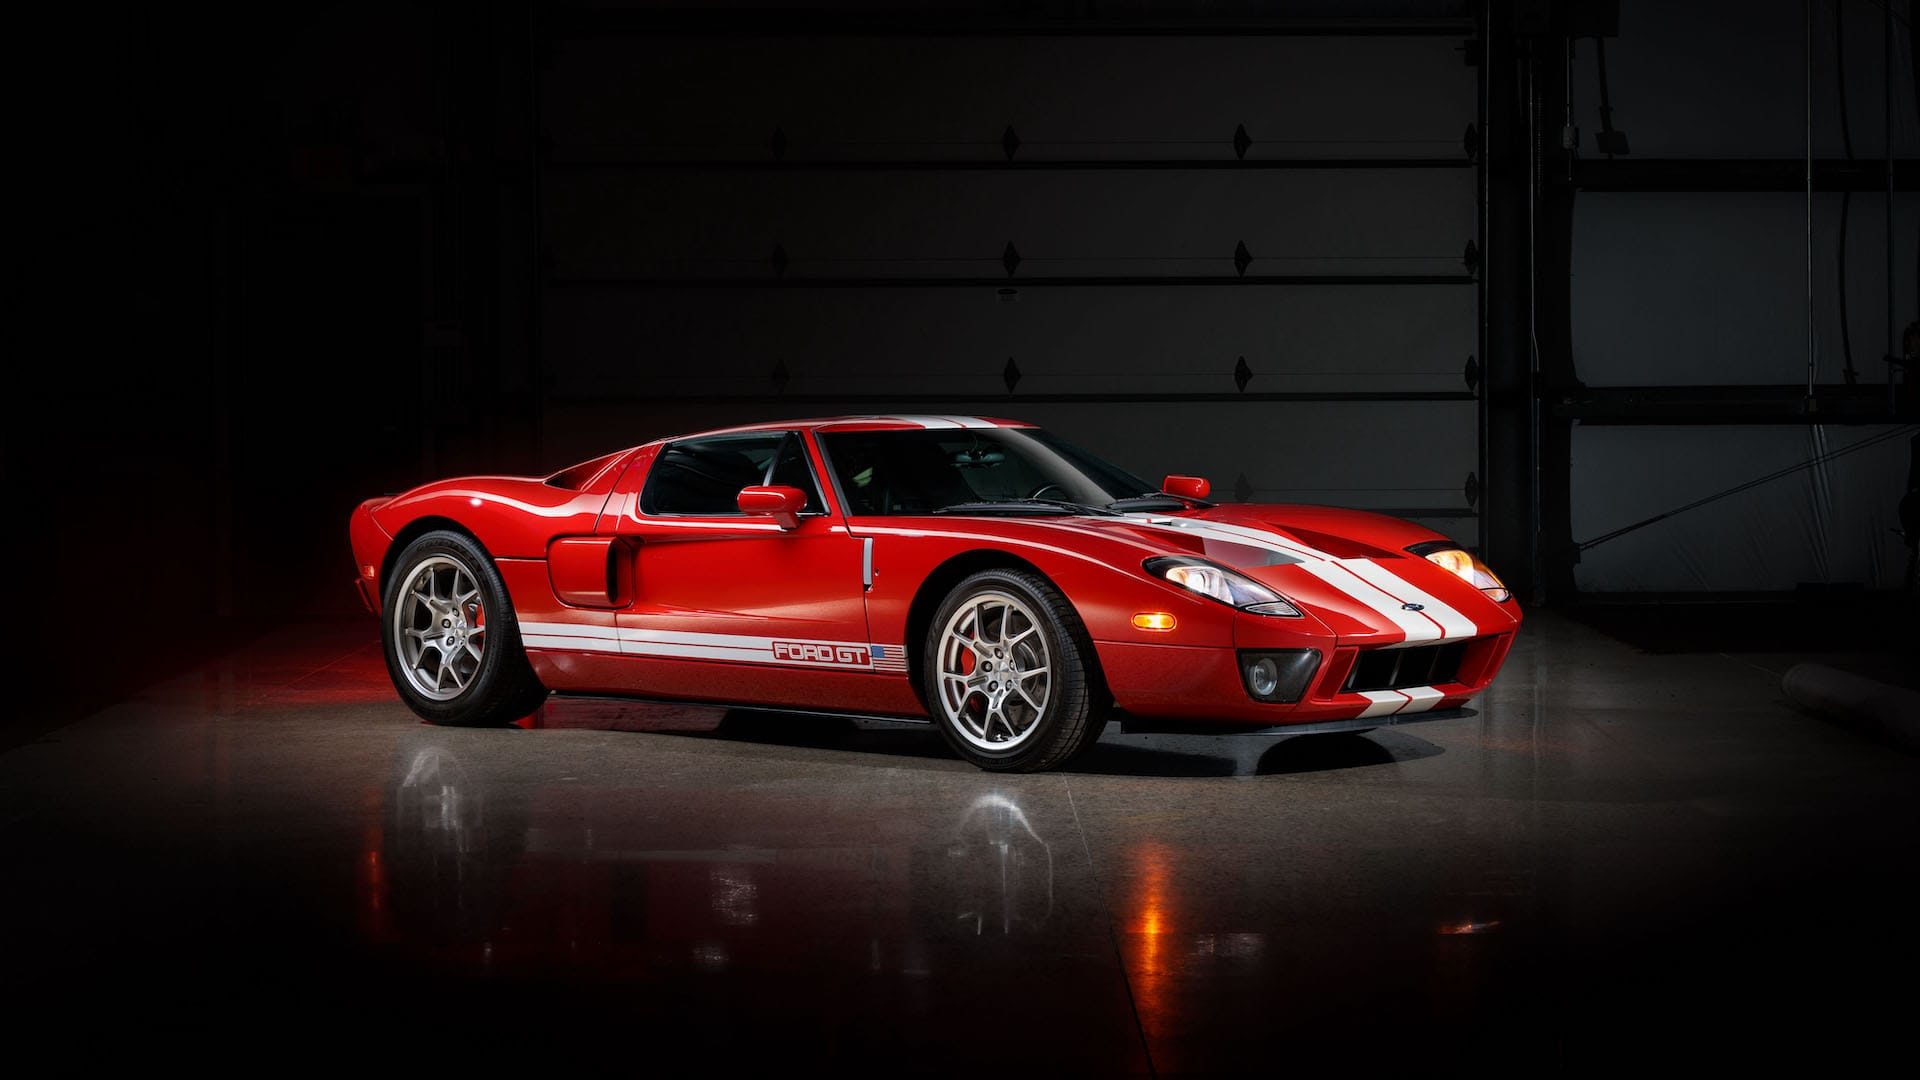 Kid Rock's 2005 Ford GT